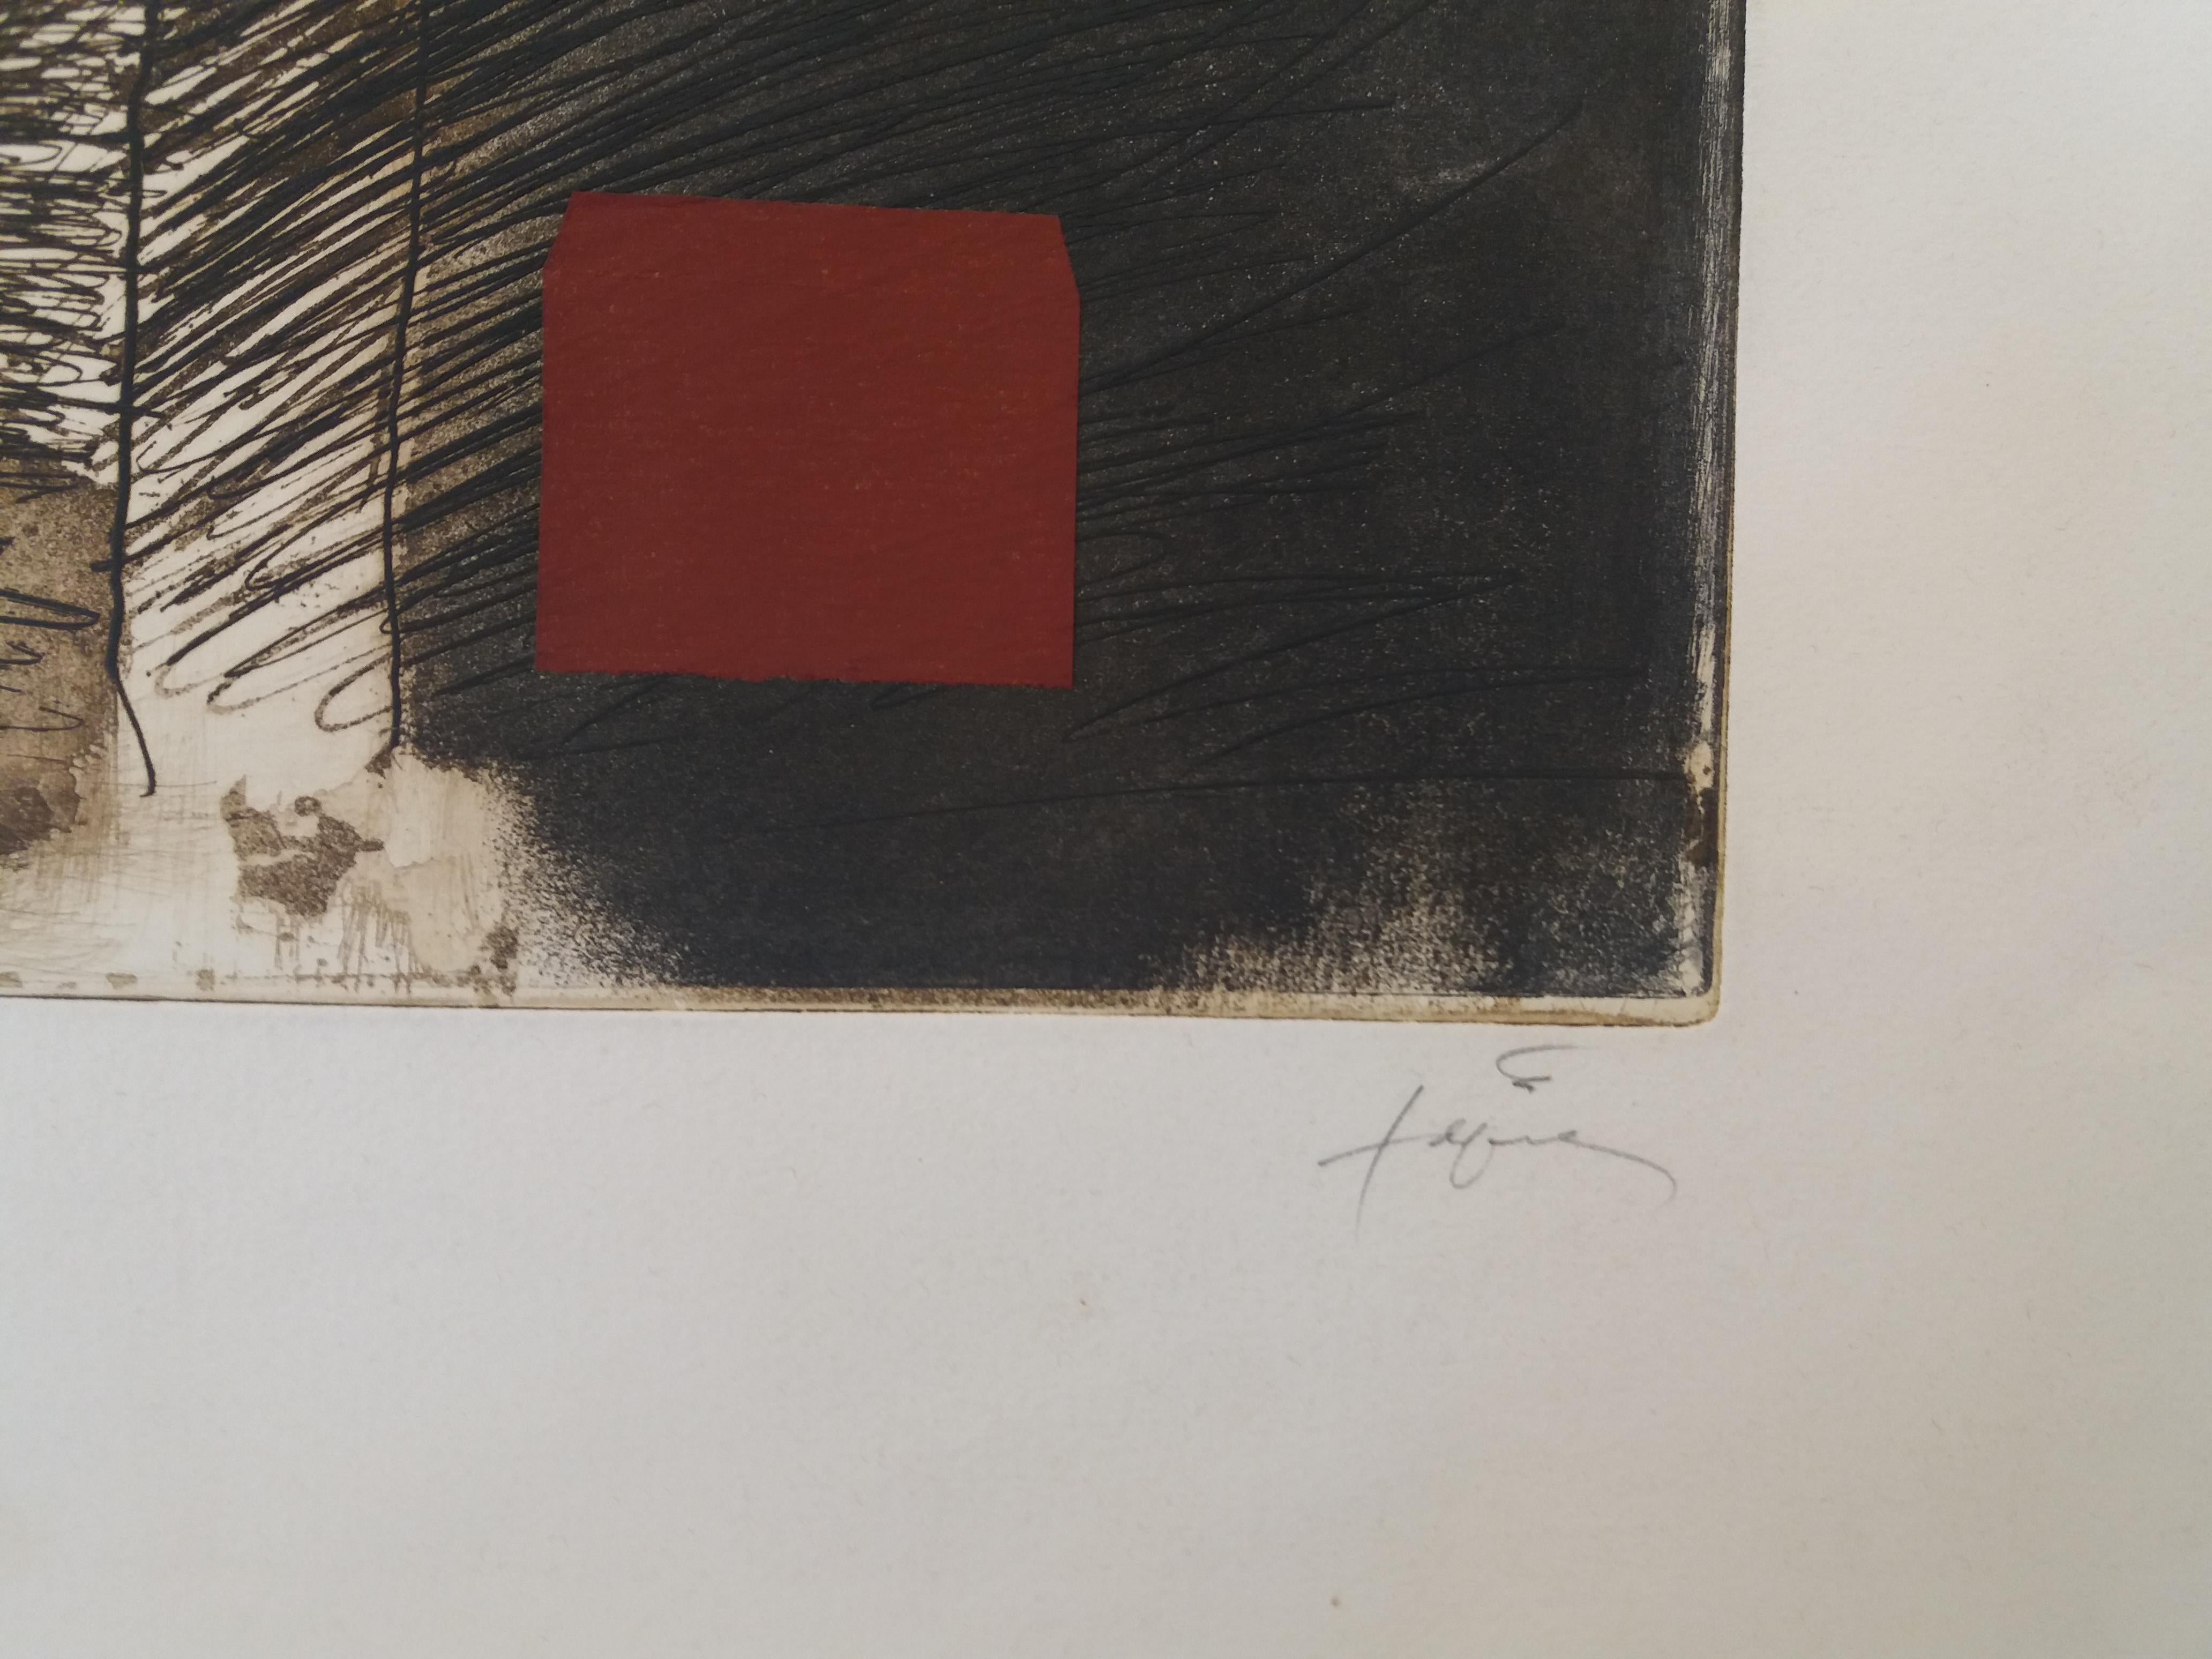 LLull i Tapies original engraving painting. 
TÀPIES PUIG, Antoni (Barcelona, 1923-2012).
Antoni Tàpies begins in art during the long convalescence from a lung disease. It will be devoted progressively more strongly to drawing and painting, and